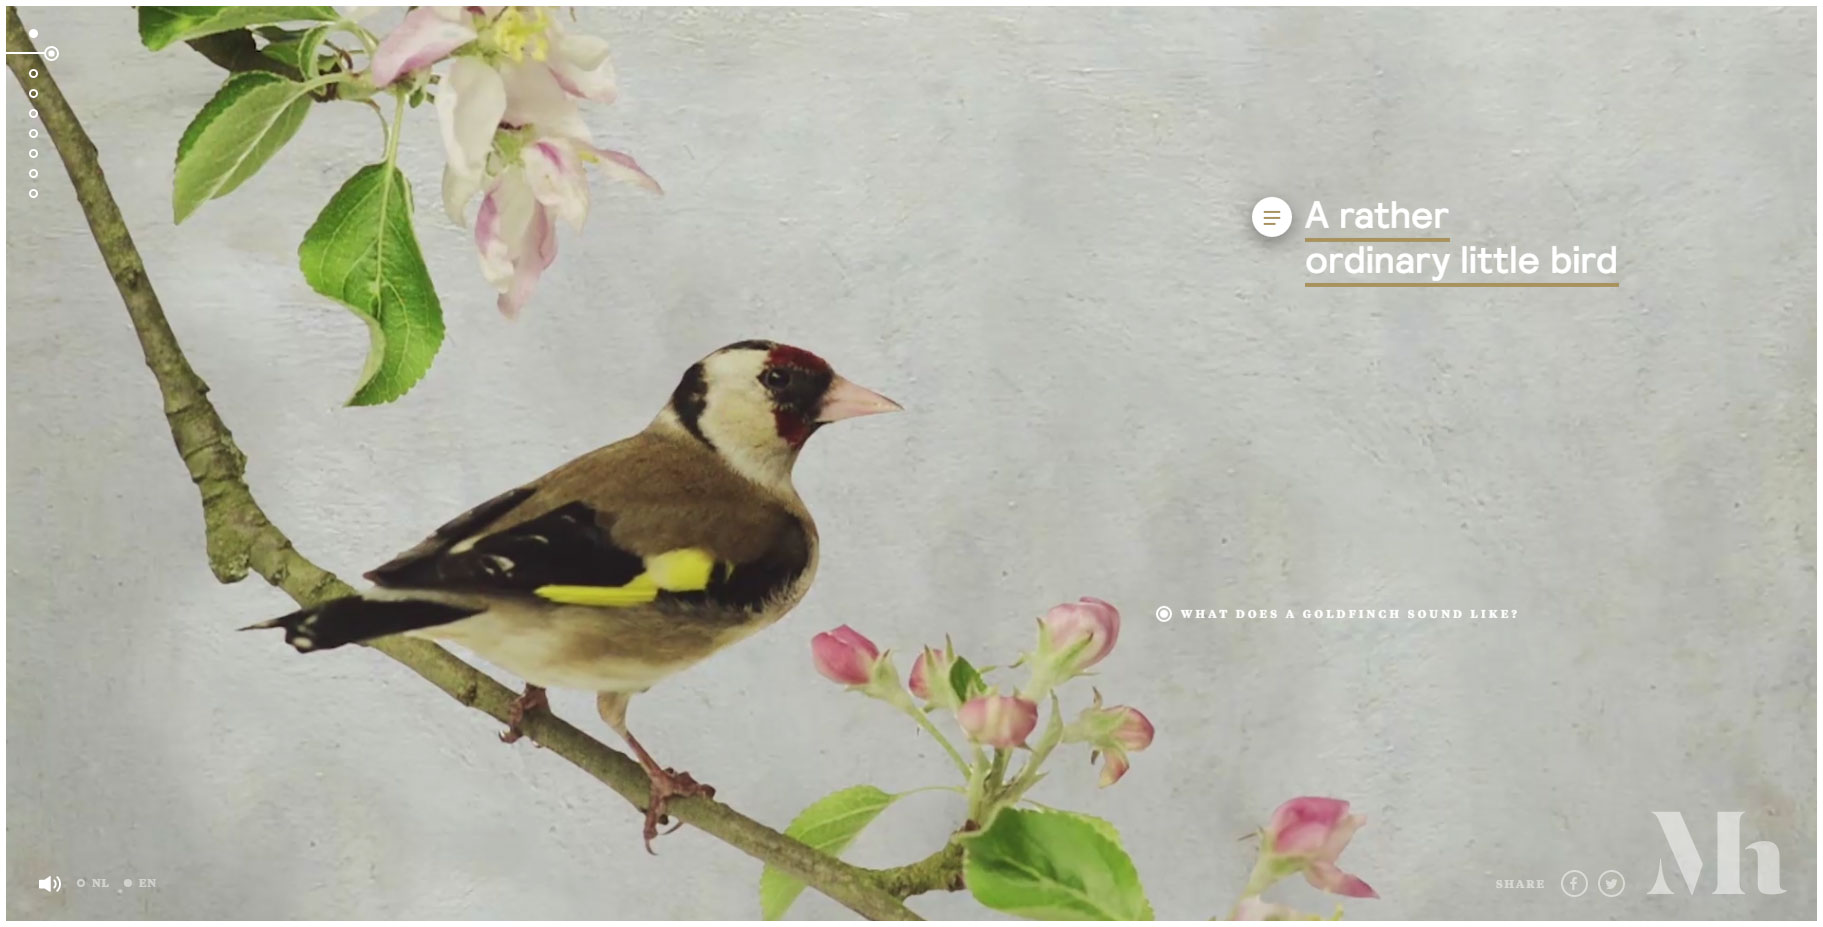 The Goldfinch - Website of the Day